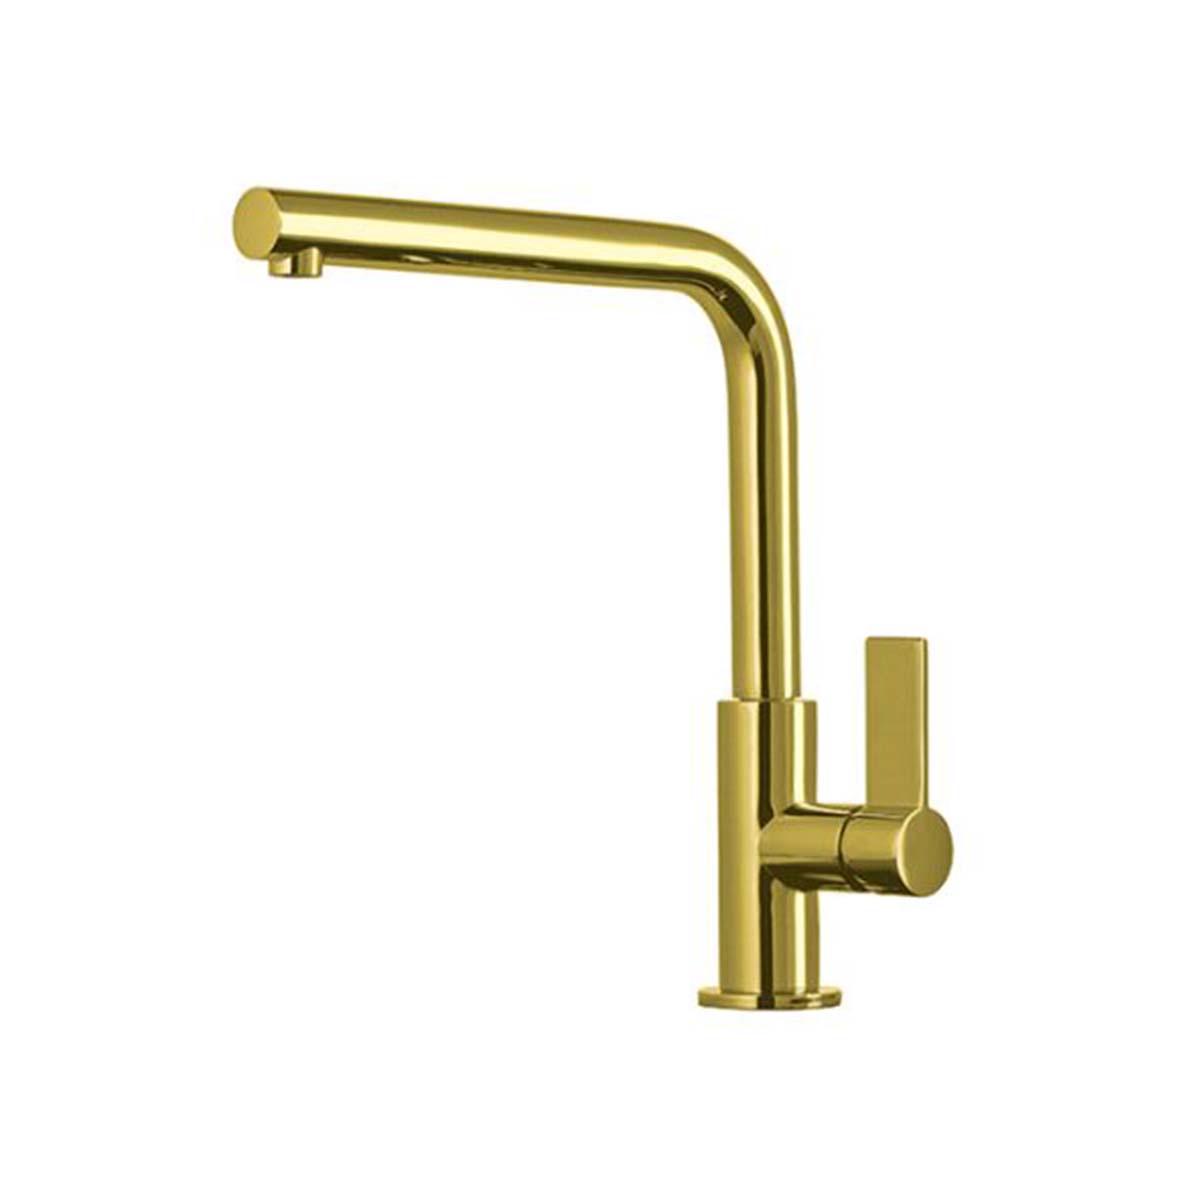 Foster omega single lever kitchen tap gold pvd